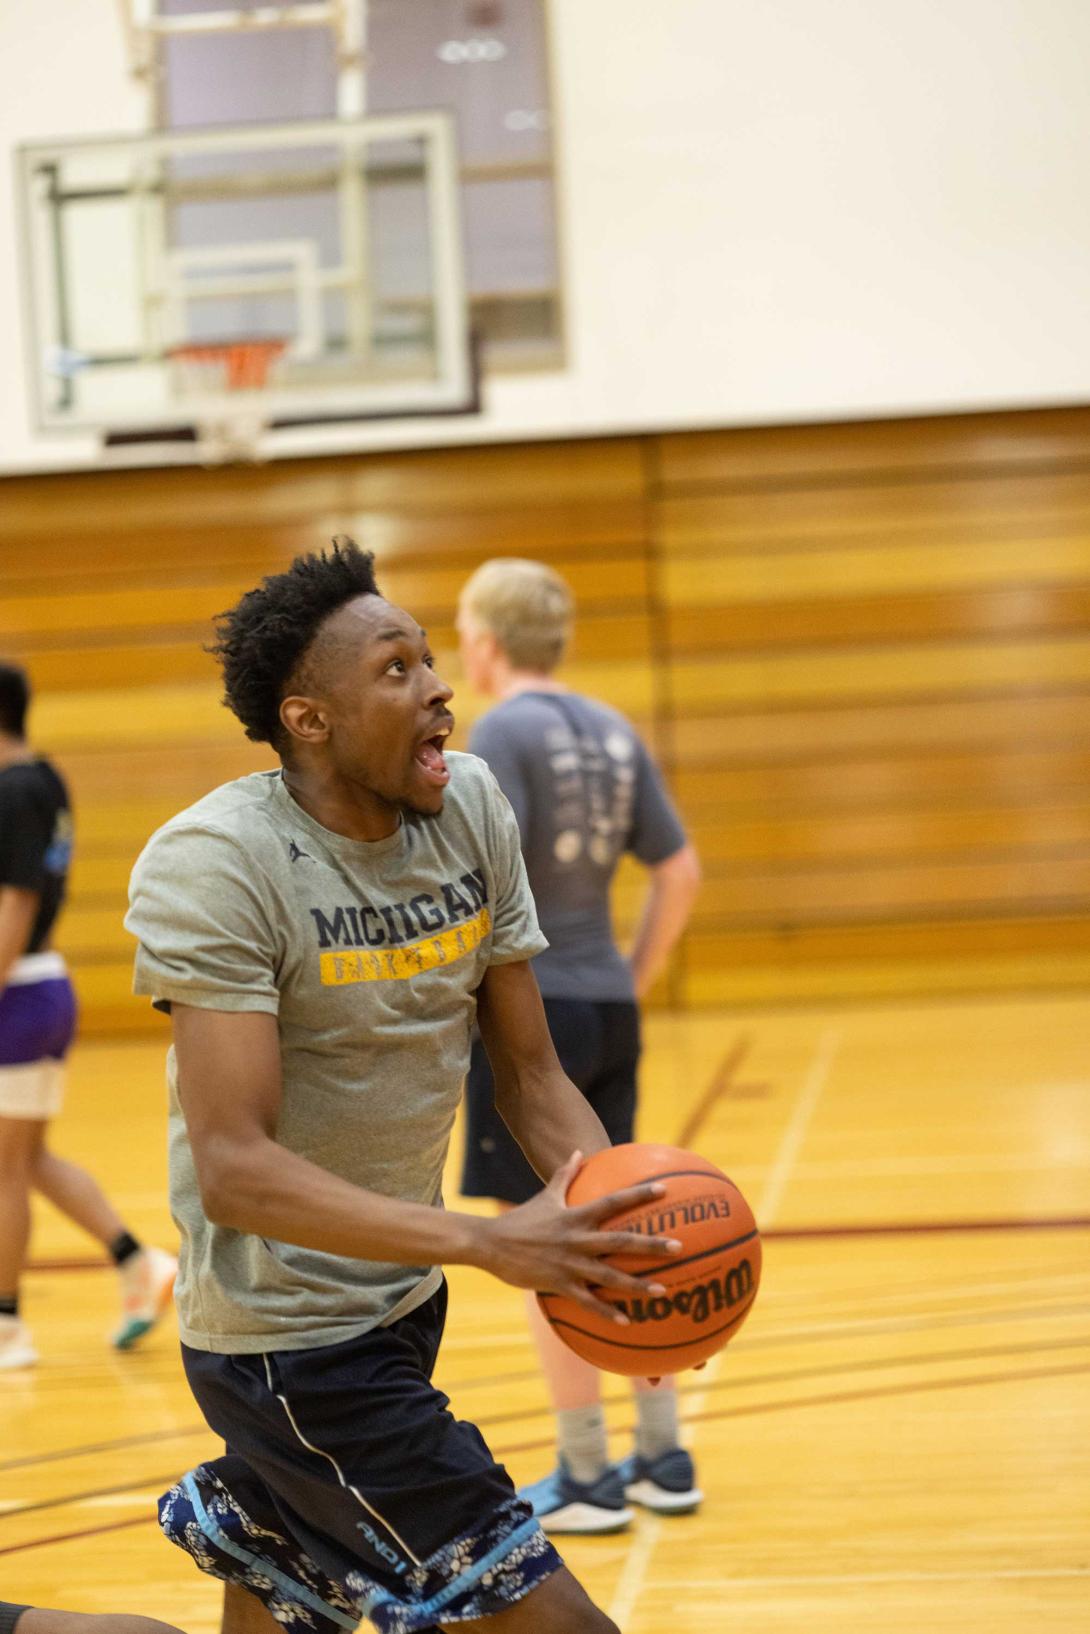 An intramural basketball player goes up for a layup.